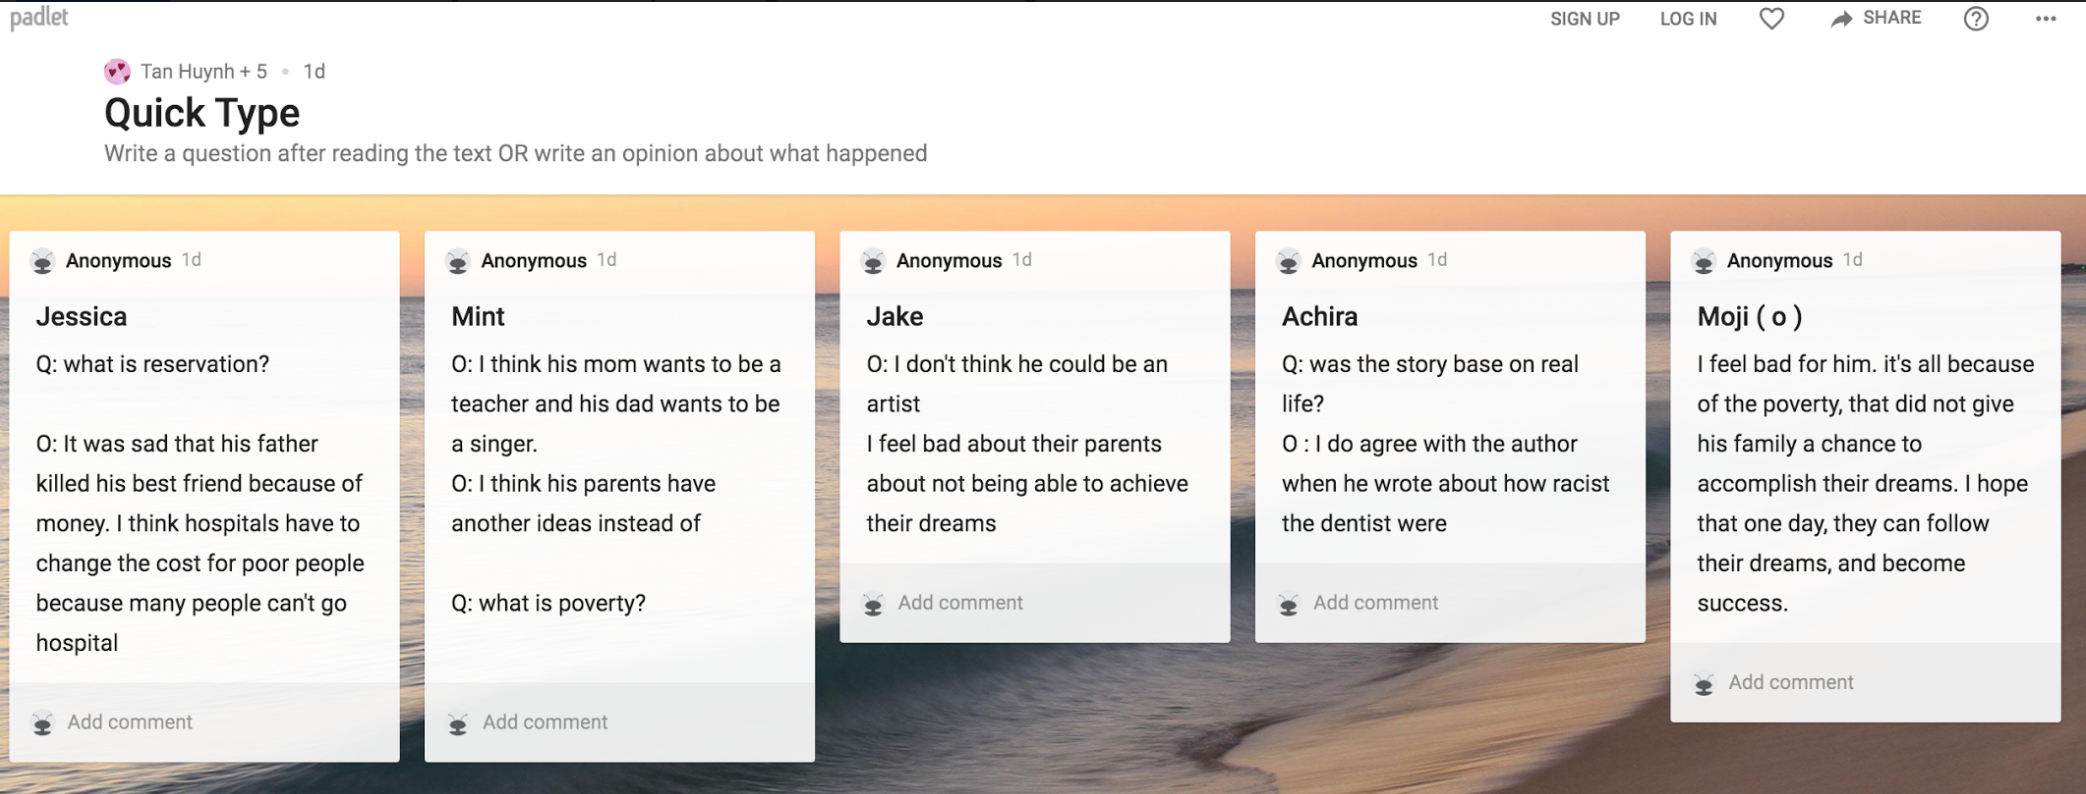 Meaning padlet What is